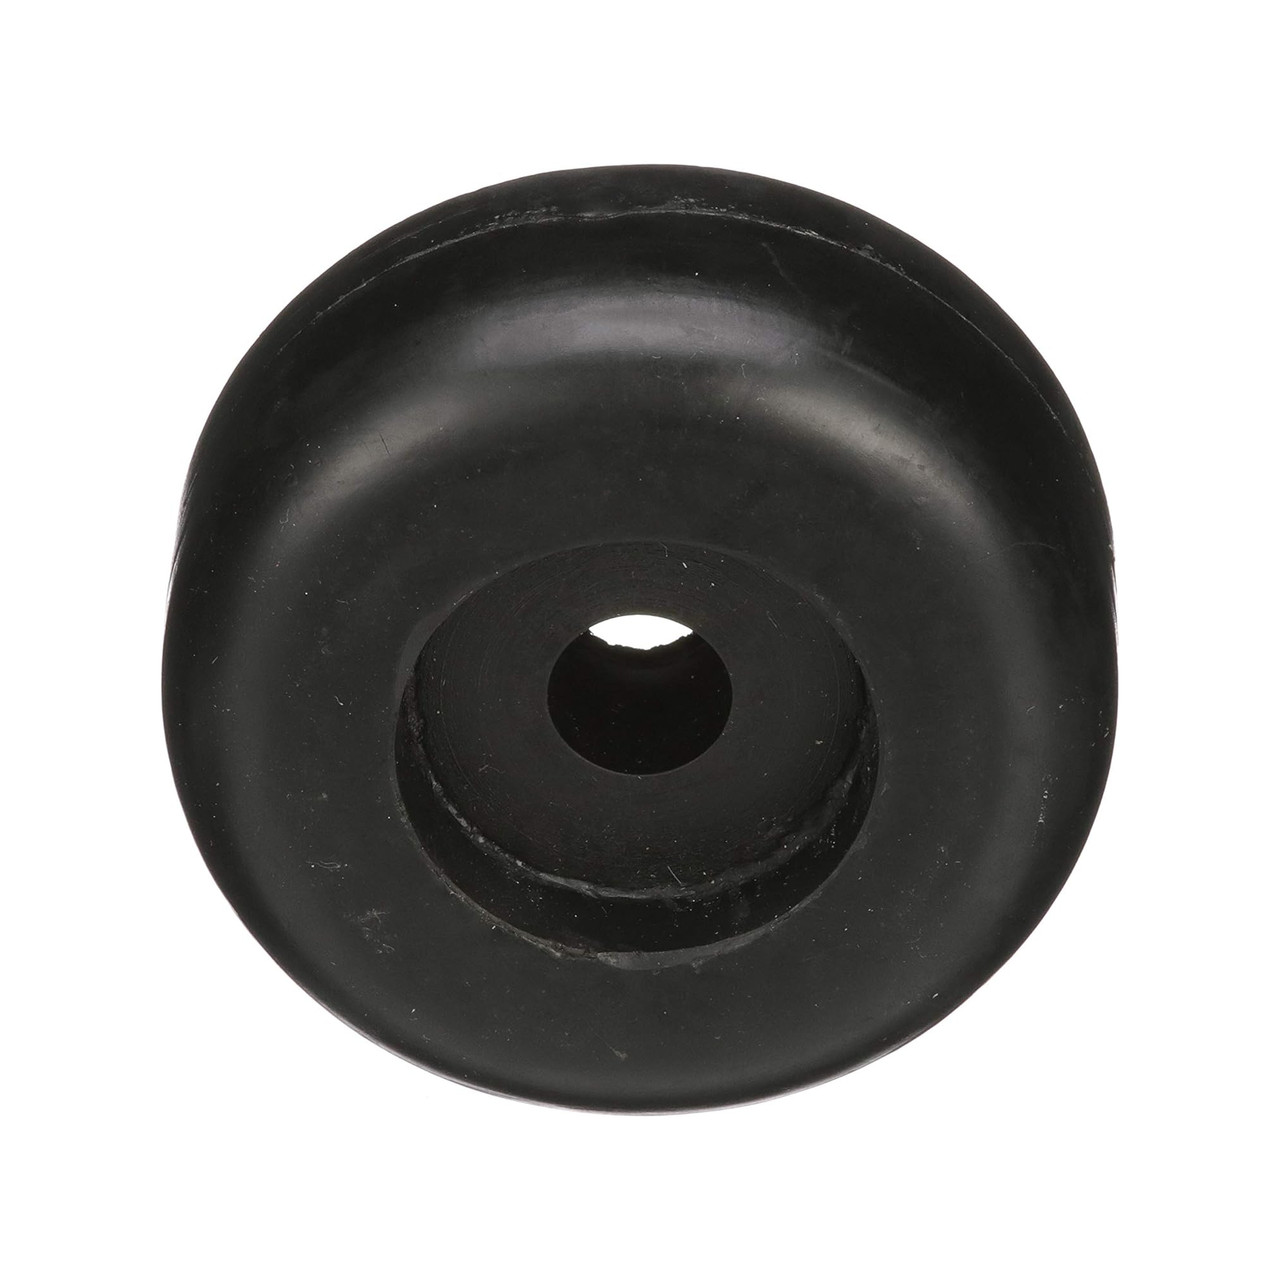 Seachoice New Black Rubber Roller End Cap Pack of 2, 50-56400